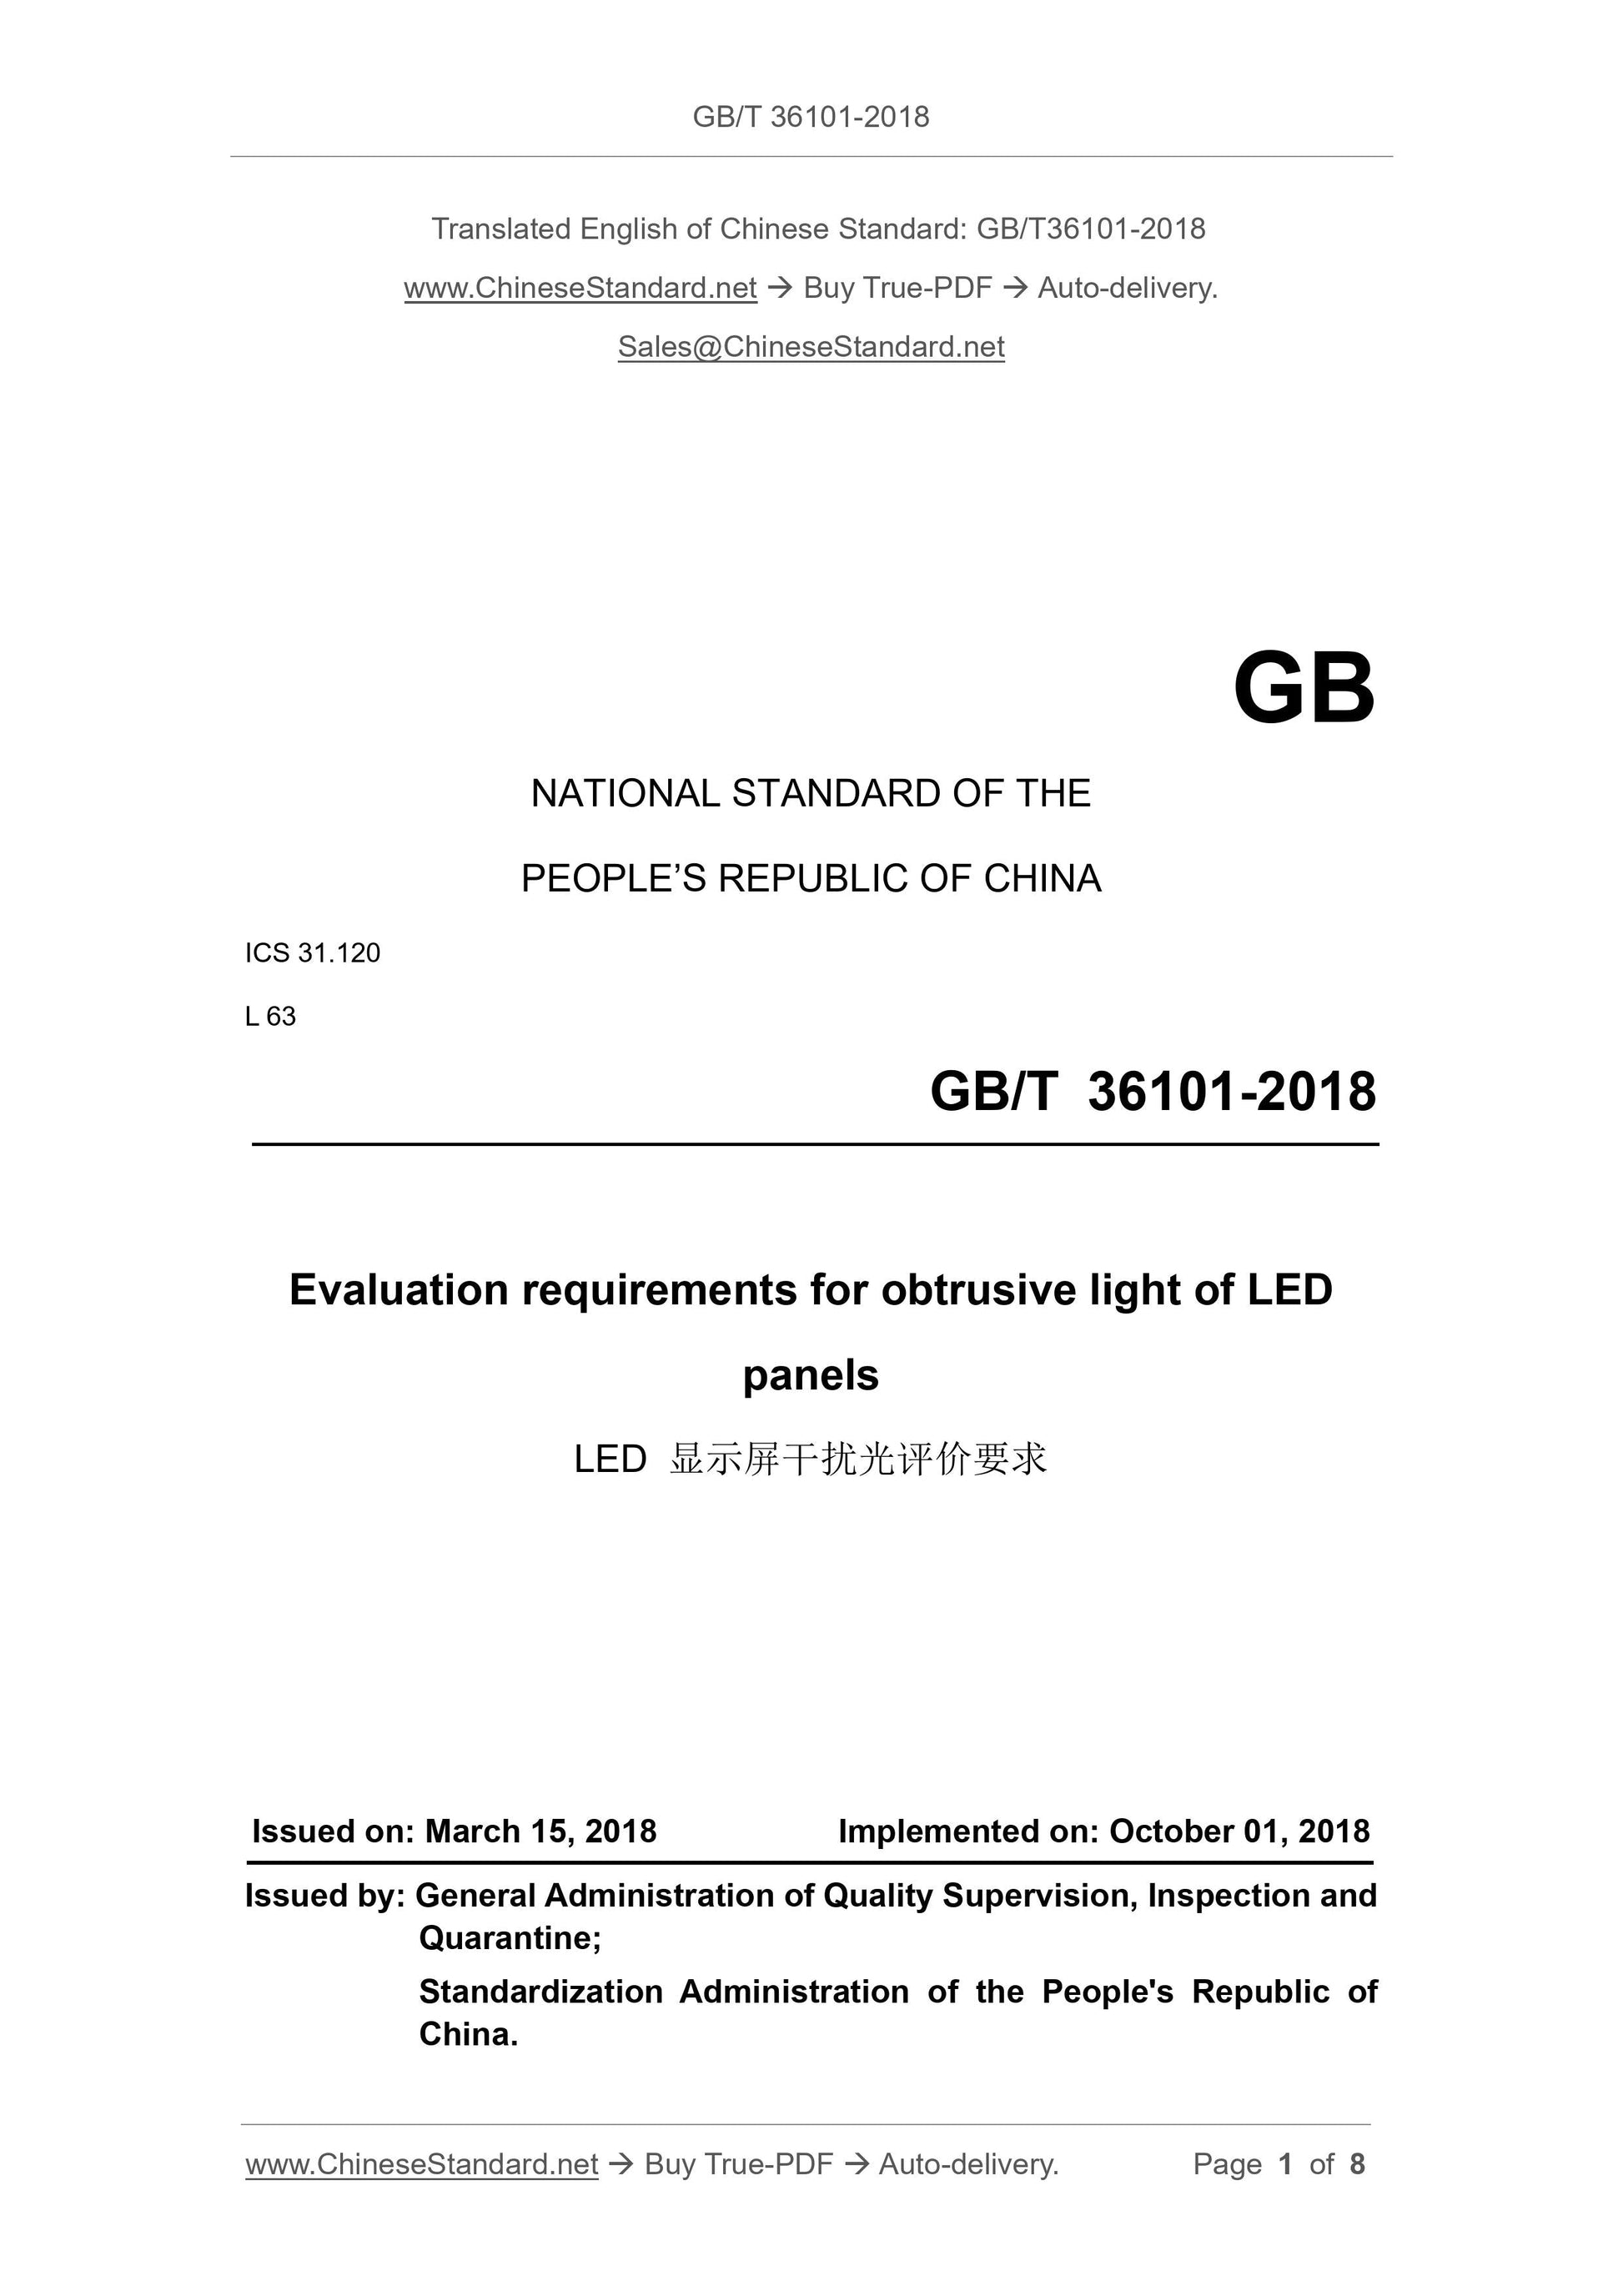 GB/T 36101-2018 Page 1